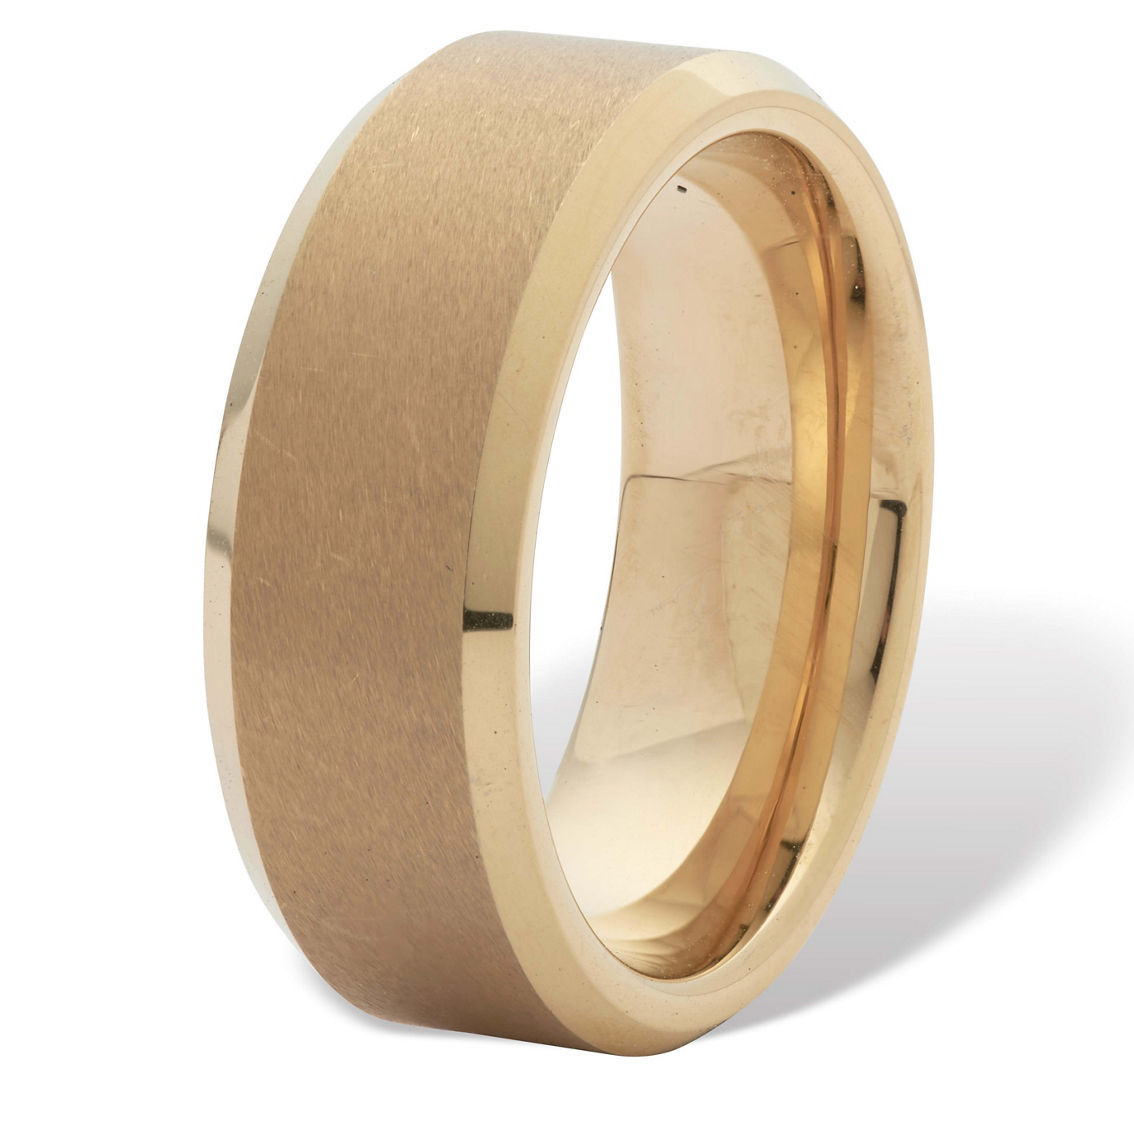 PalmBeach Men's Gold Ion-Plated Tungsten Brushed Finish Bevel Edge Wedding Band - Image 2 of 5